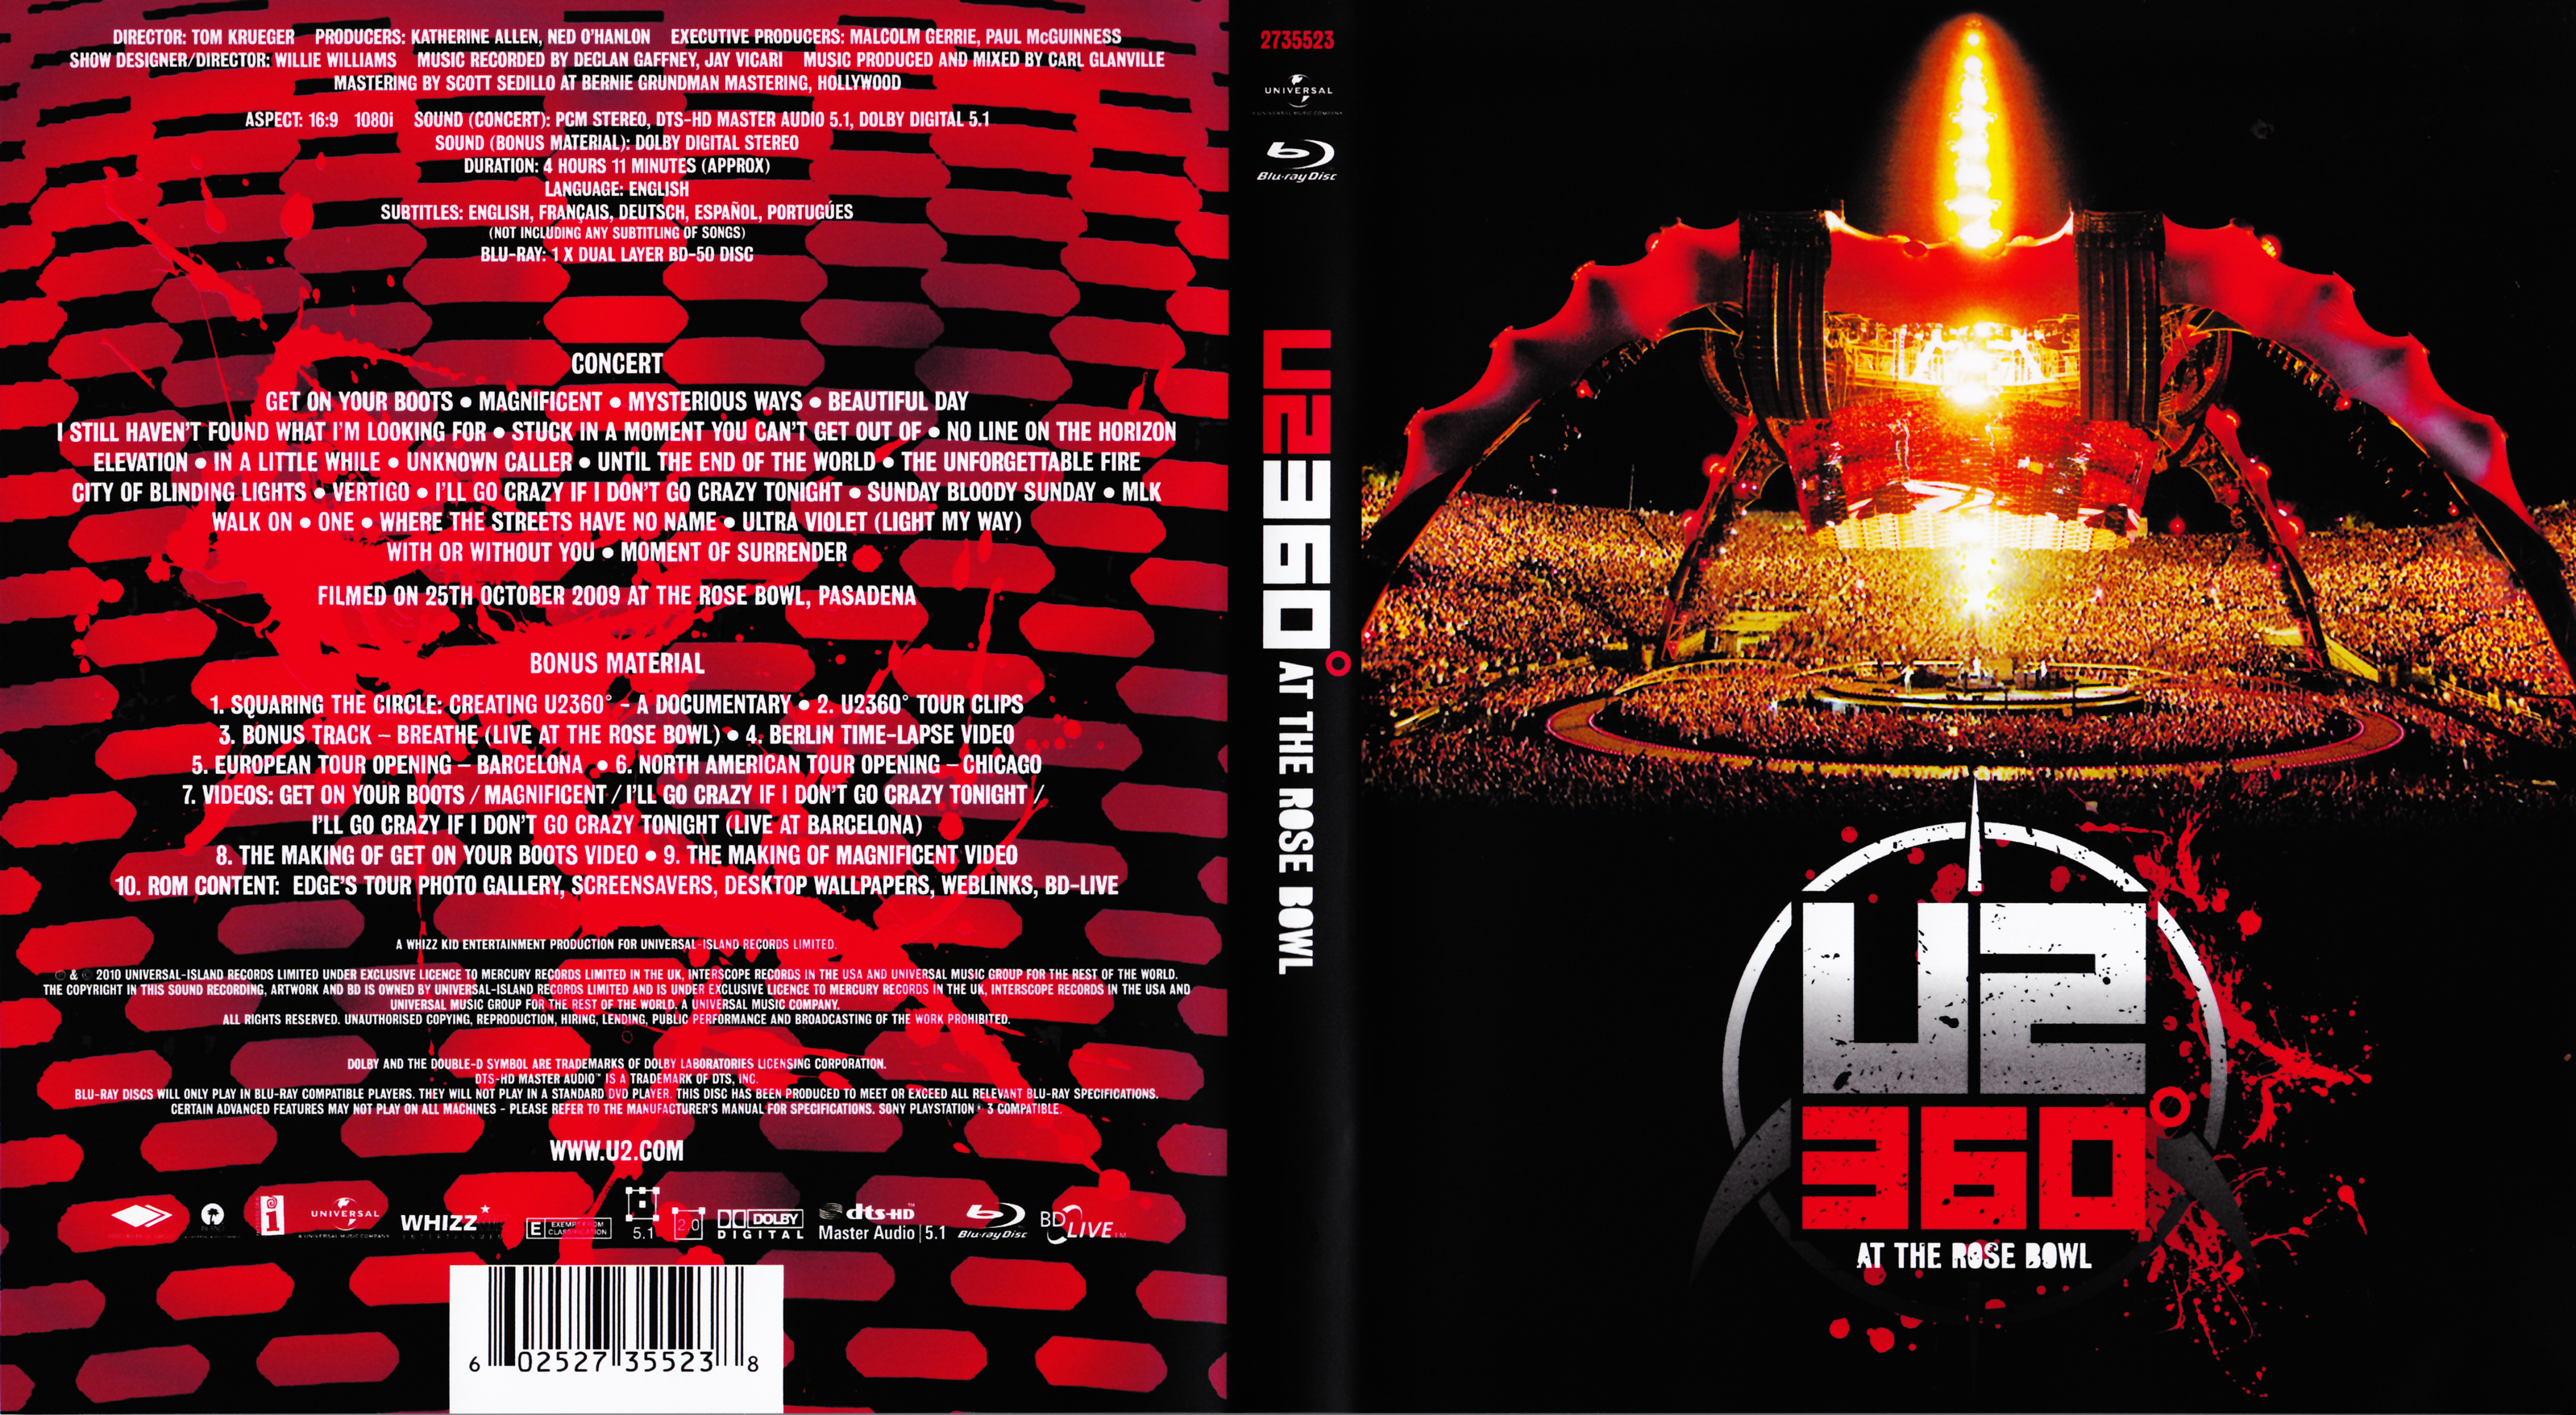 Jaquette DVD U2 360 at the Rose Bowl (BLU-RAY)